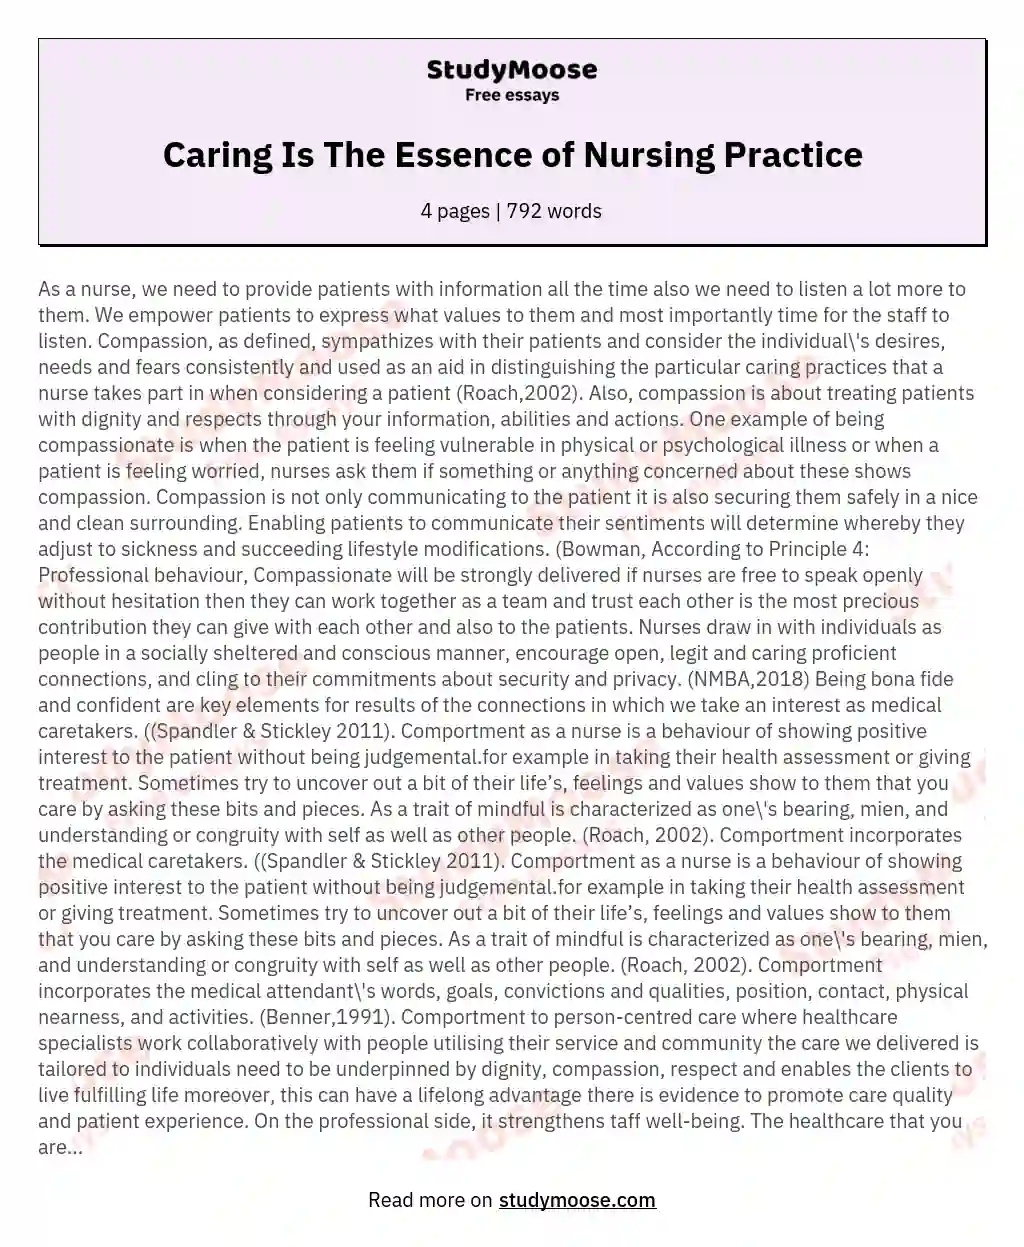 Caring Is The Essence of Nursing Practice essay